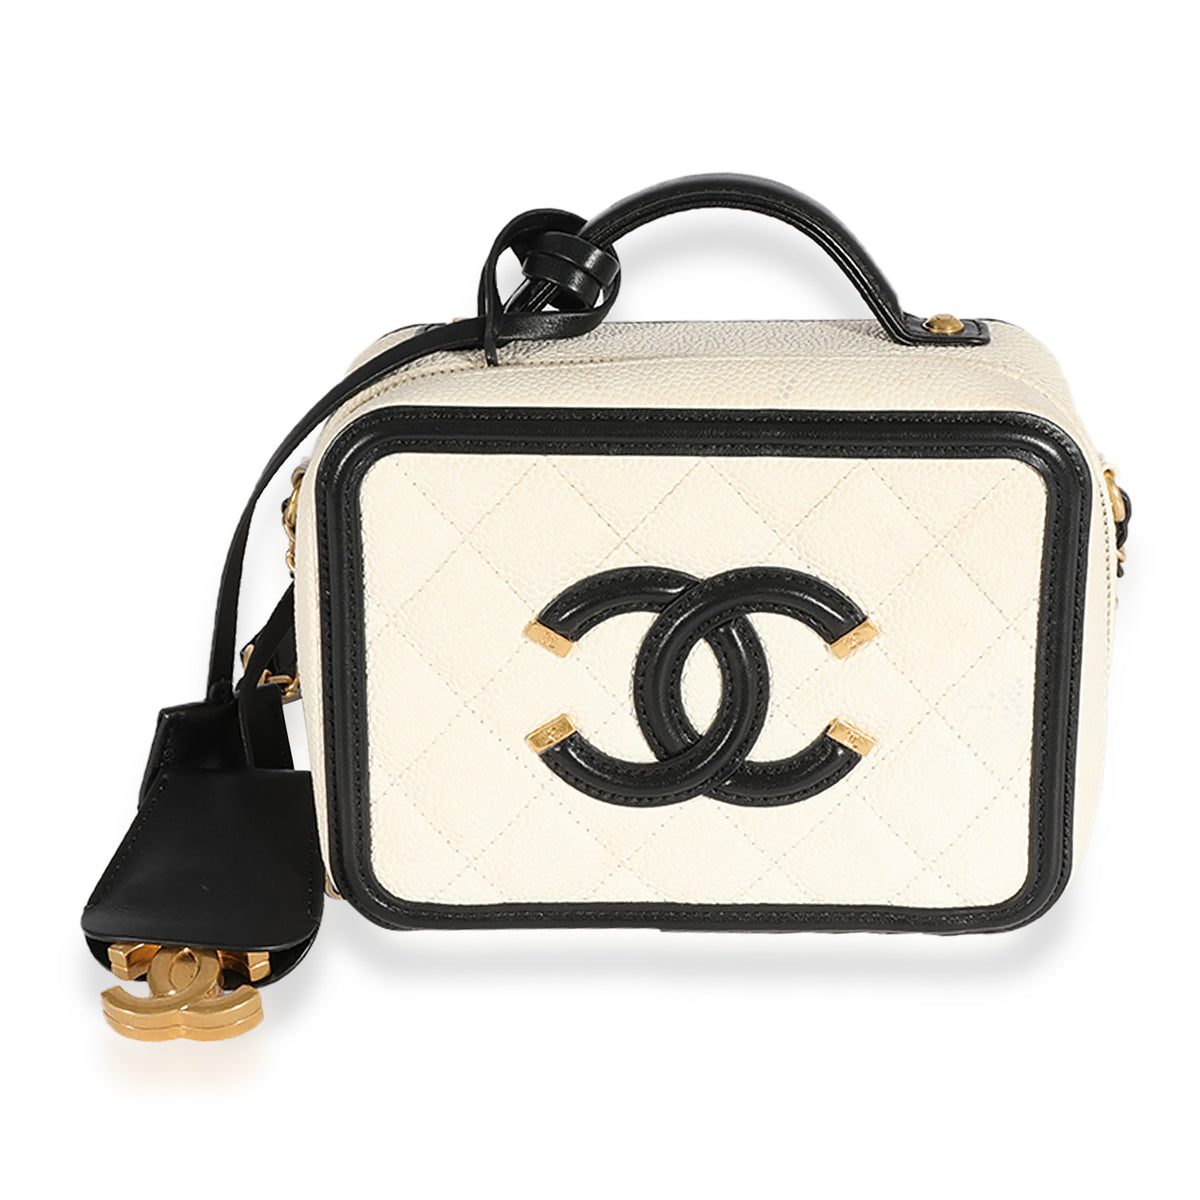 Chanel White Quilted Caviar Small Filigree Vanity Case